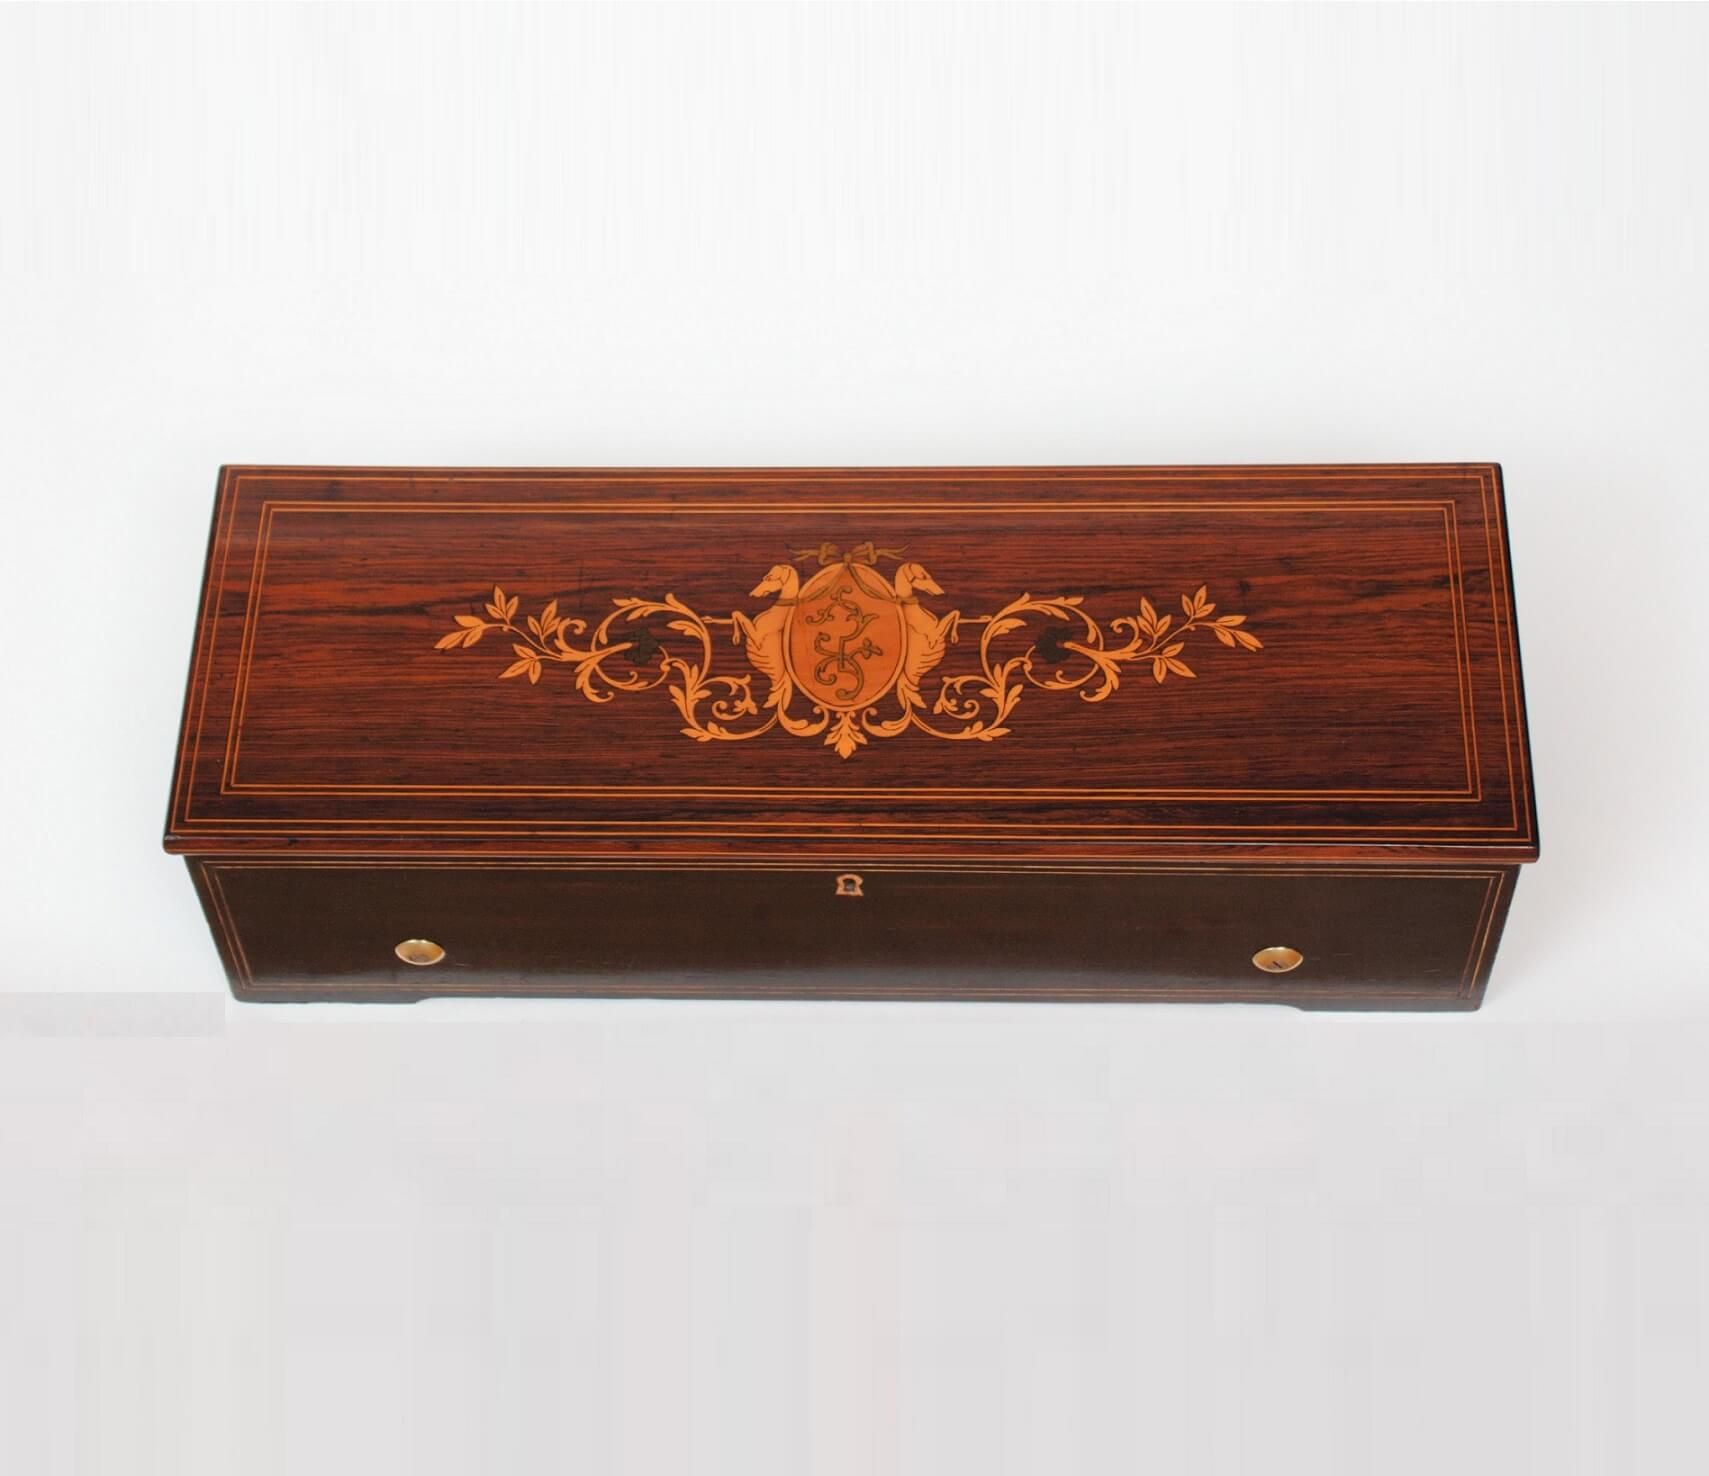 Swiss-Nicole-Freres-cylinder-music box-musical-rosewood-mozart-sidewinder-marquetry-